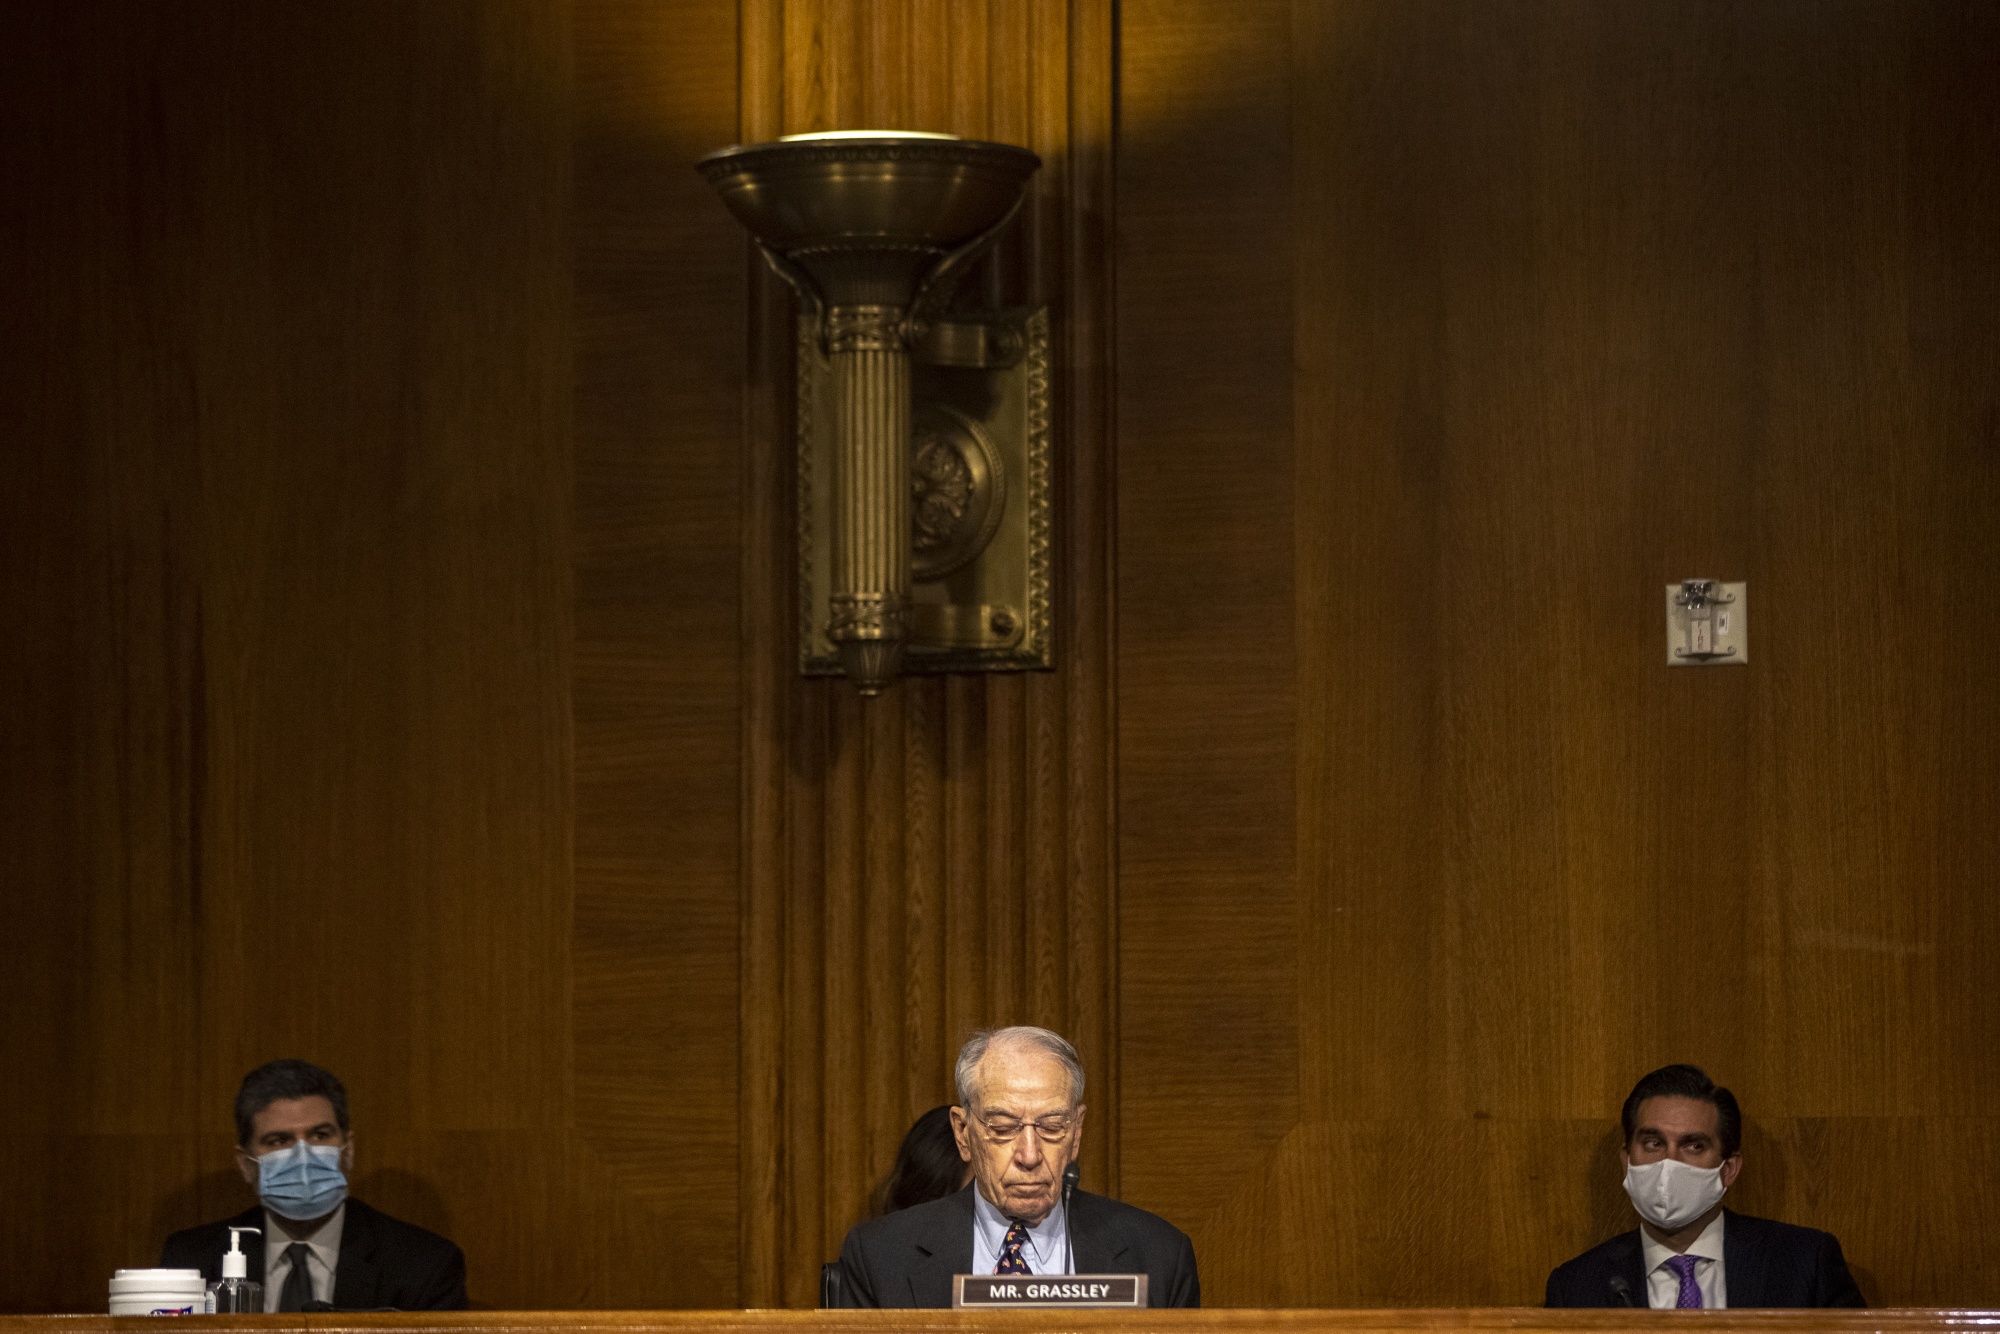 Chuck Grassley, center, during a Senate Judiciary Committee hearing on Nov. 10.